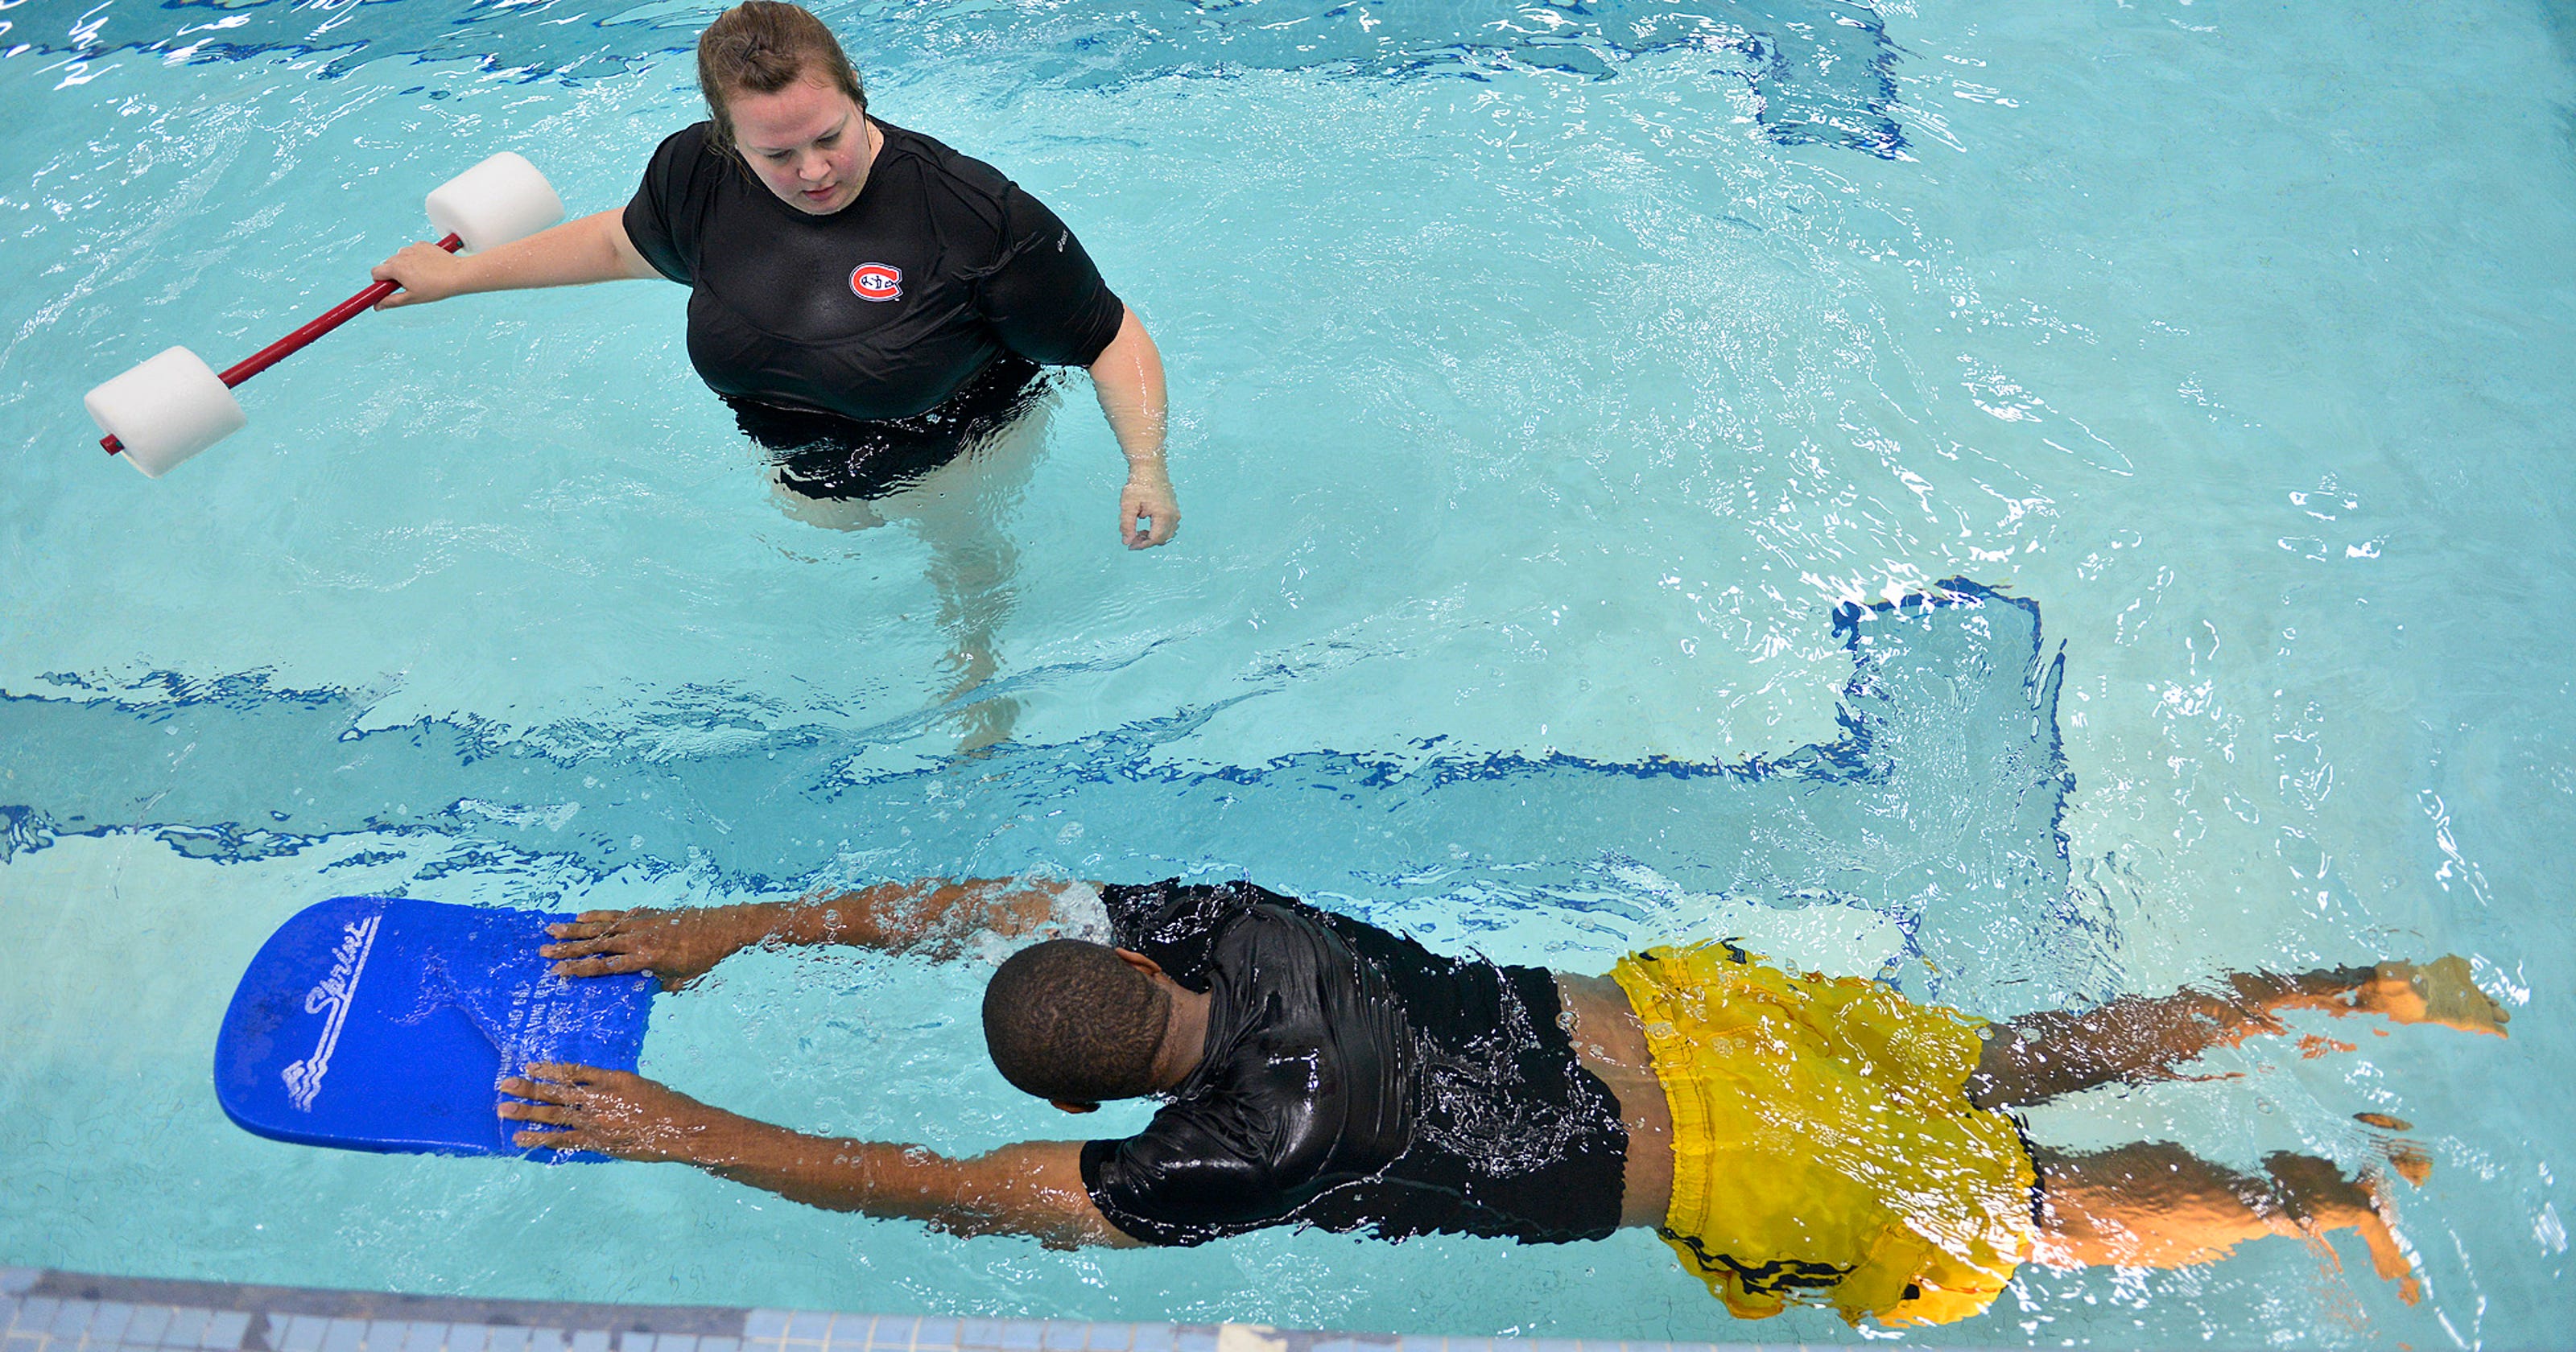 Many Swimmers Come Up Short In Water Safety Skills